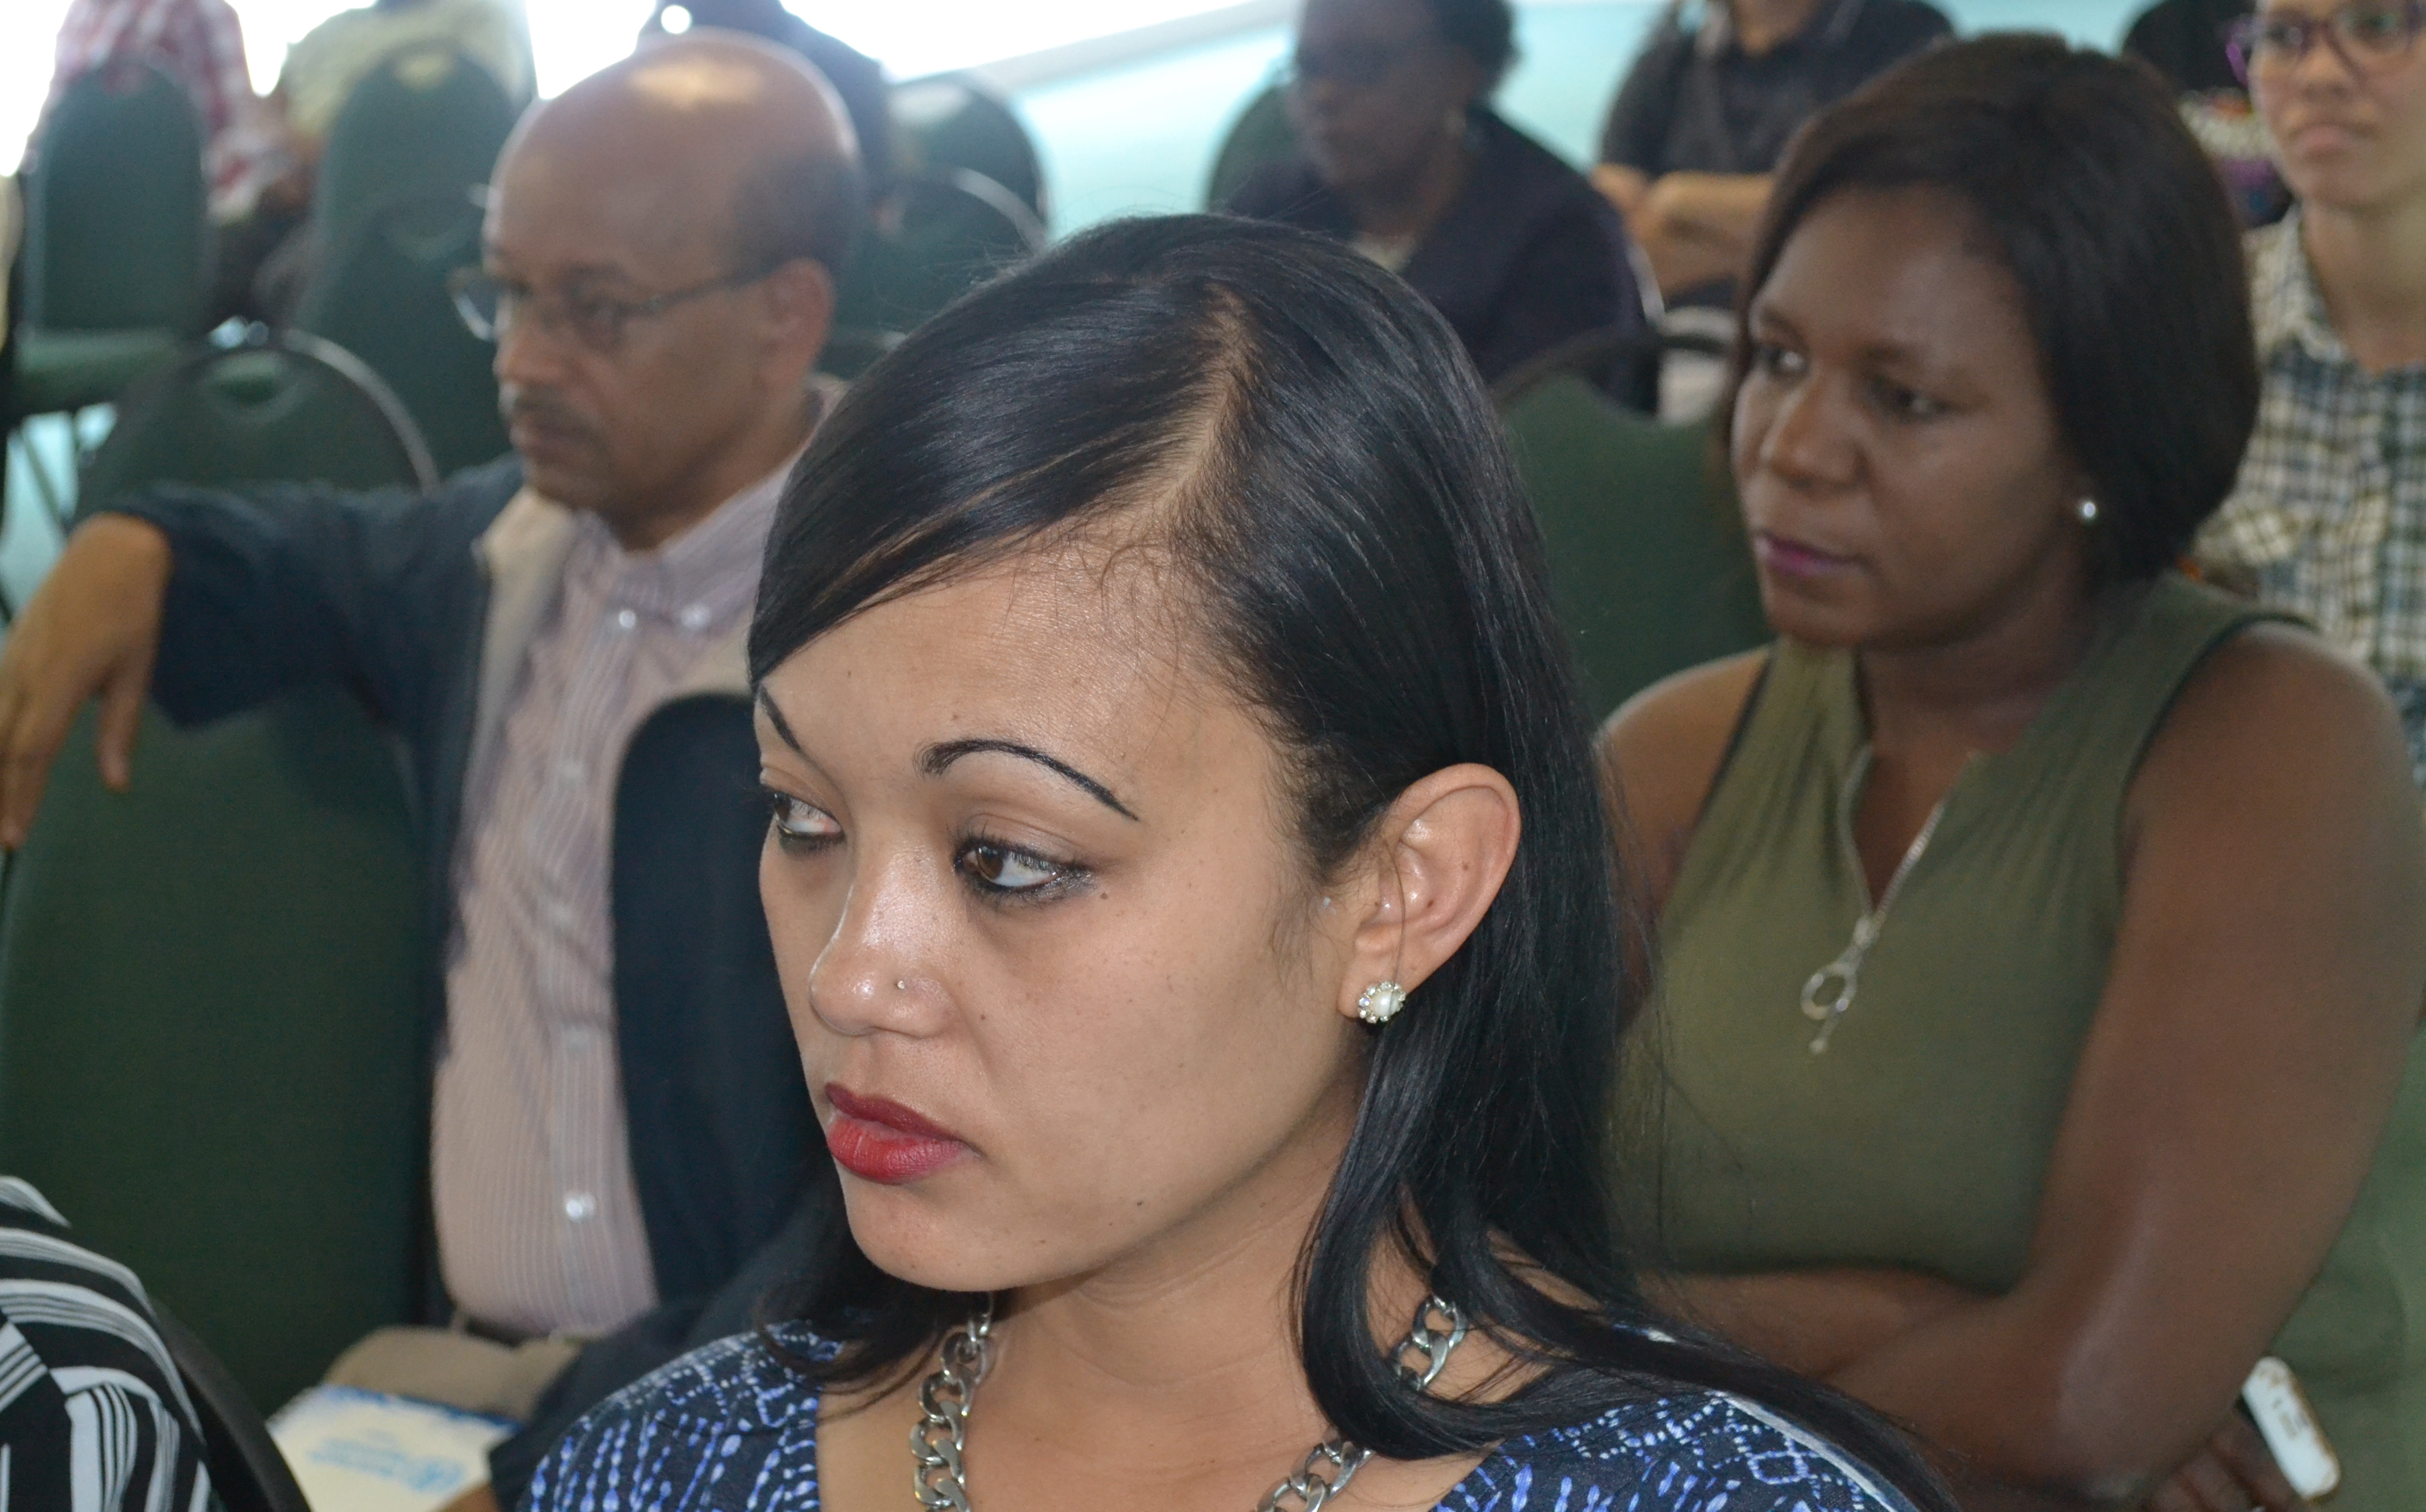 Letisia from UNFPA listening attentively to the presentations on mental health